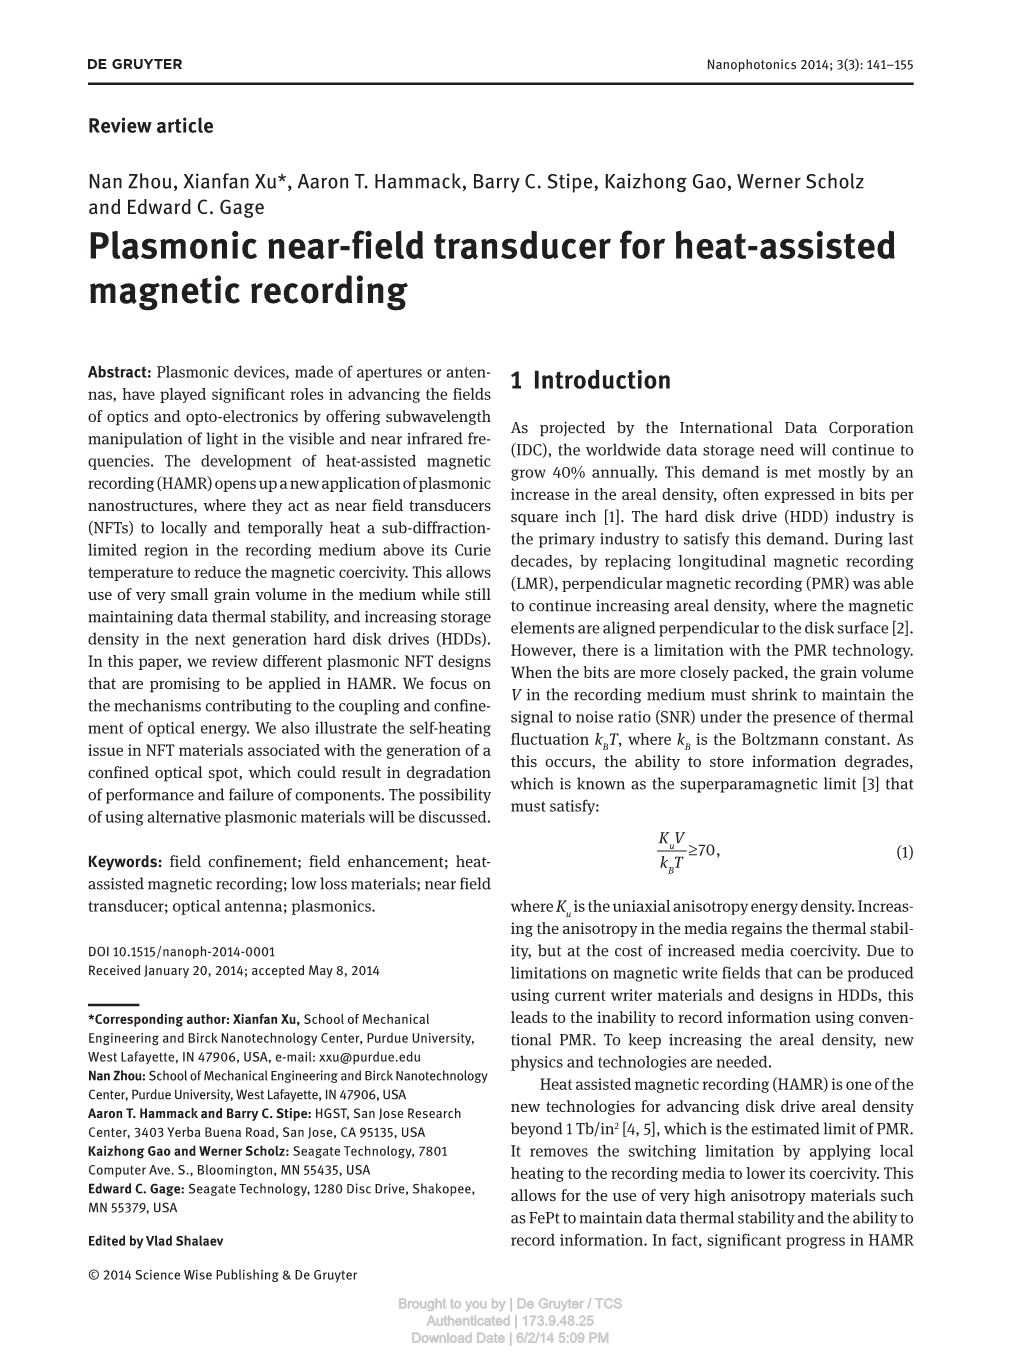 Plasmonic Near-Field Transducer for Heat-Assisted Magnetic Recording